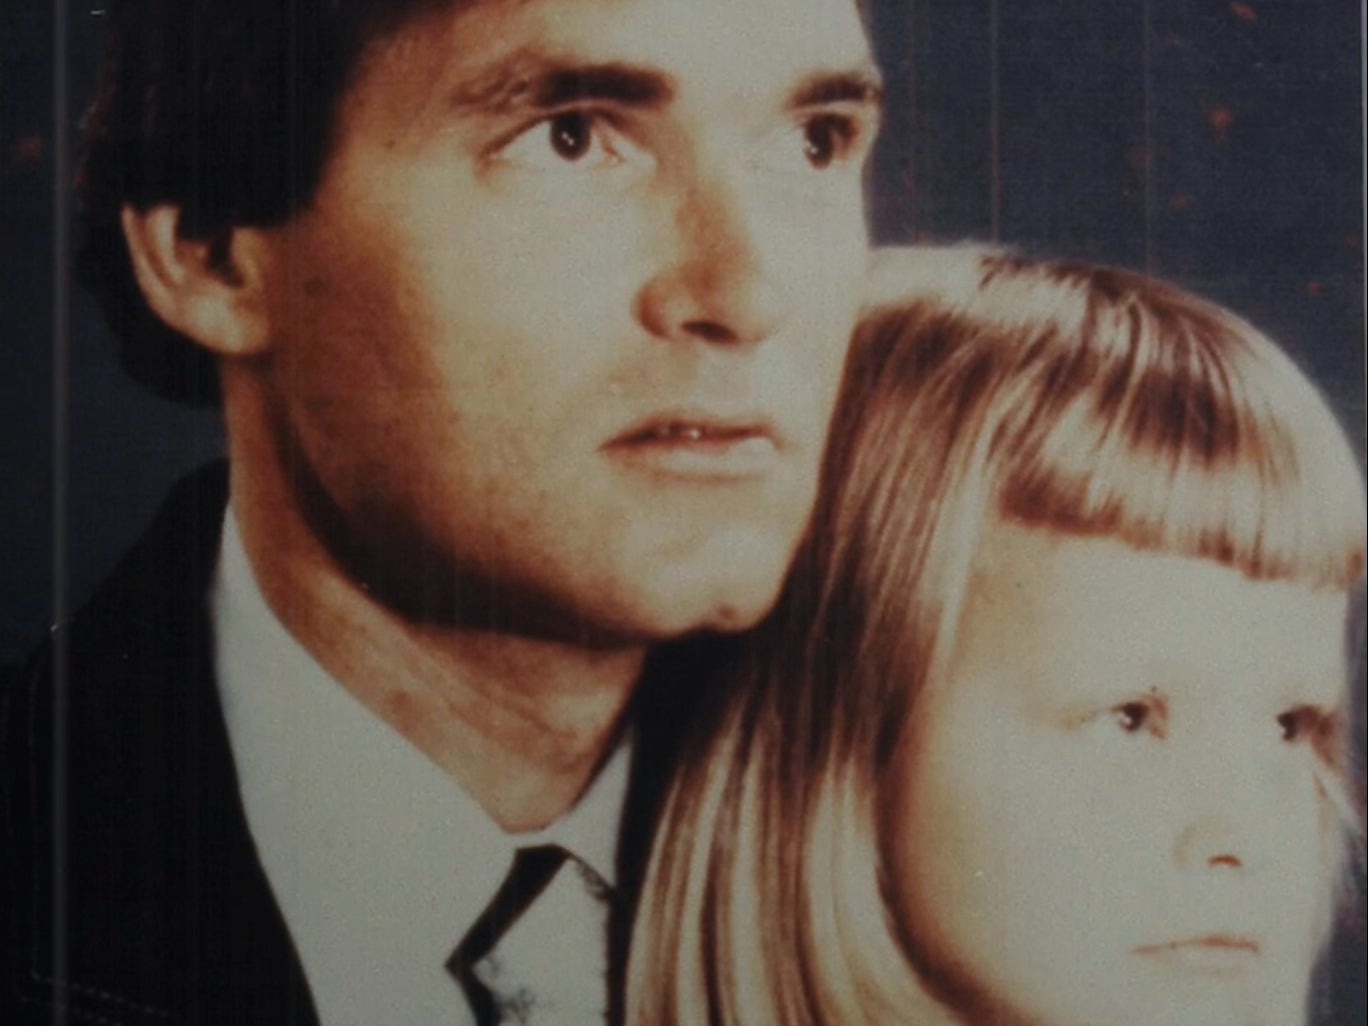 True-crime documentary ‘Girl in the Picture’ is ‘horrifying’ Netflix users